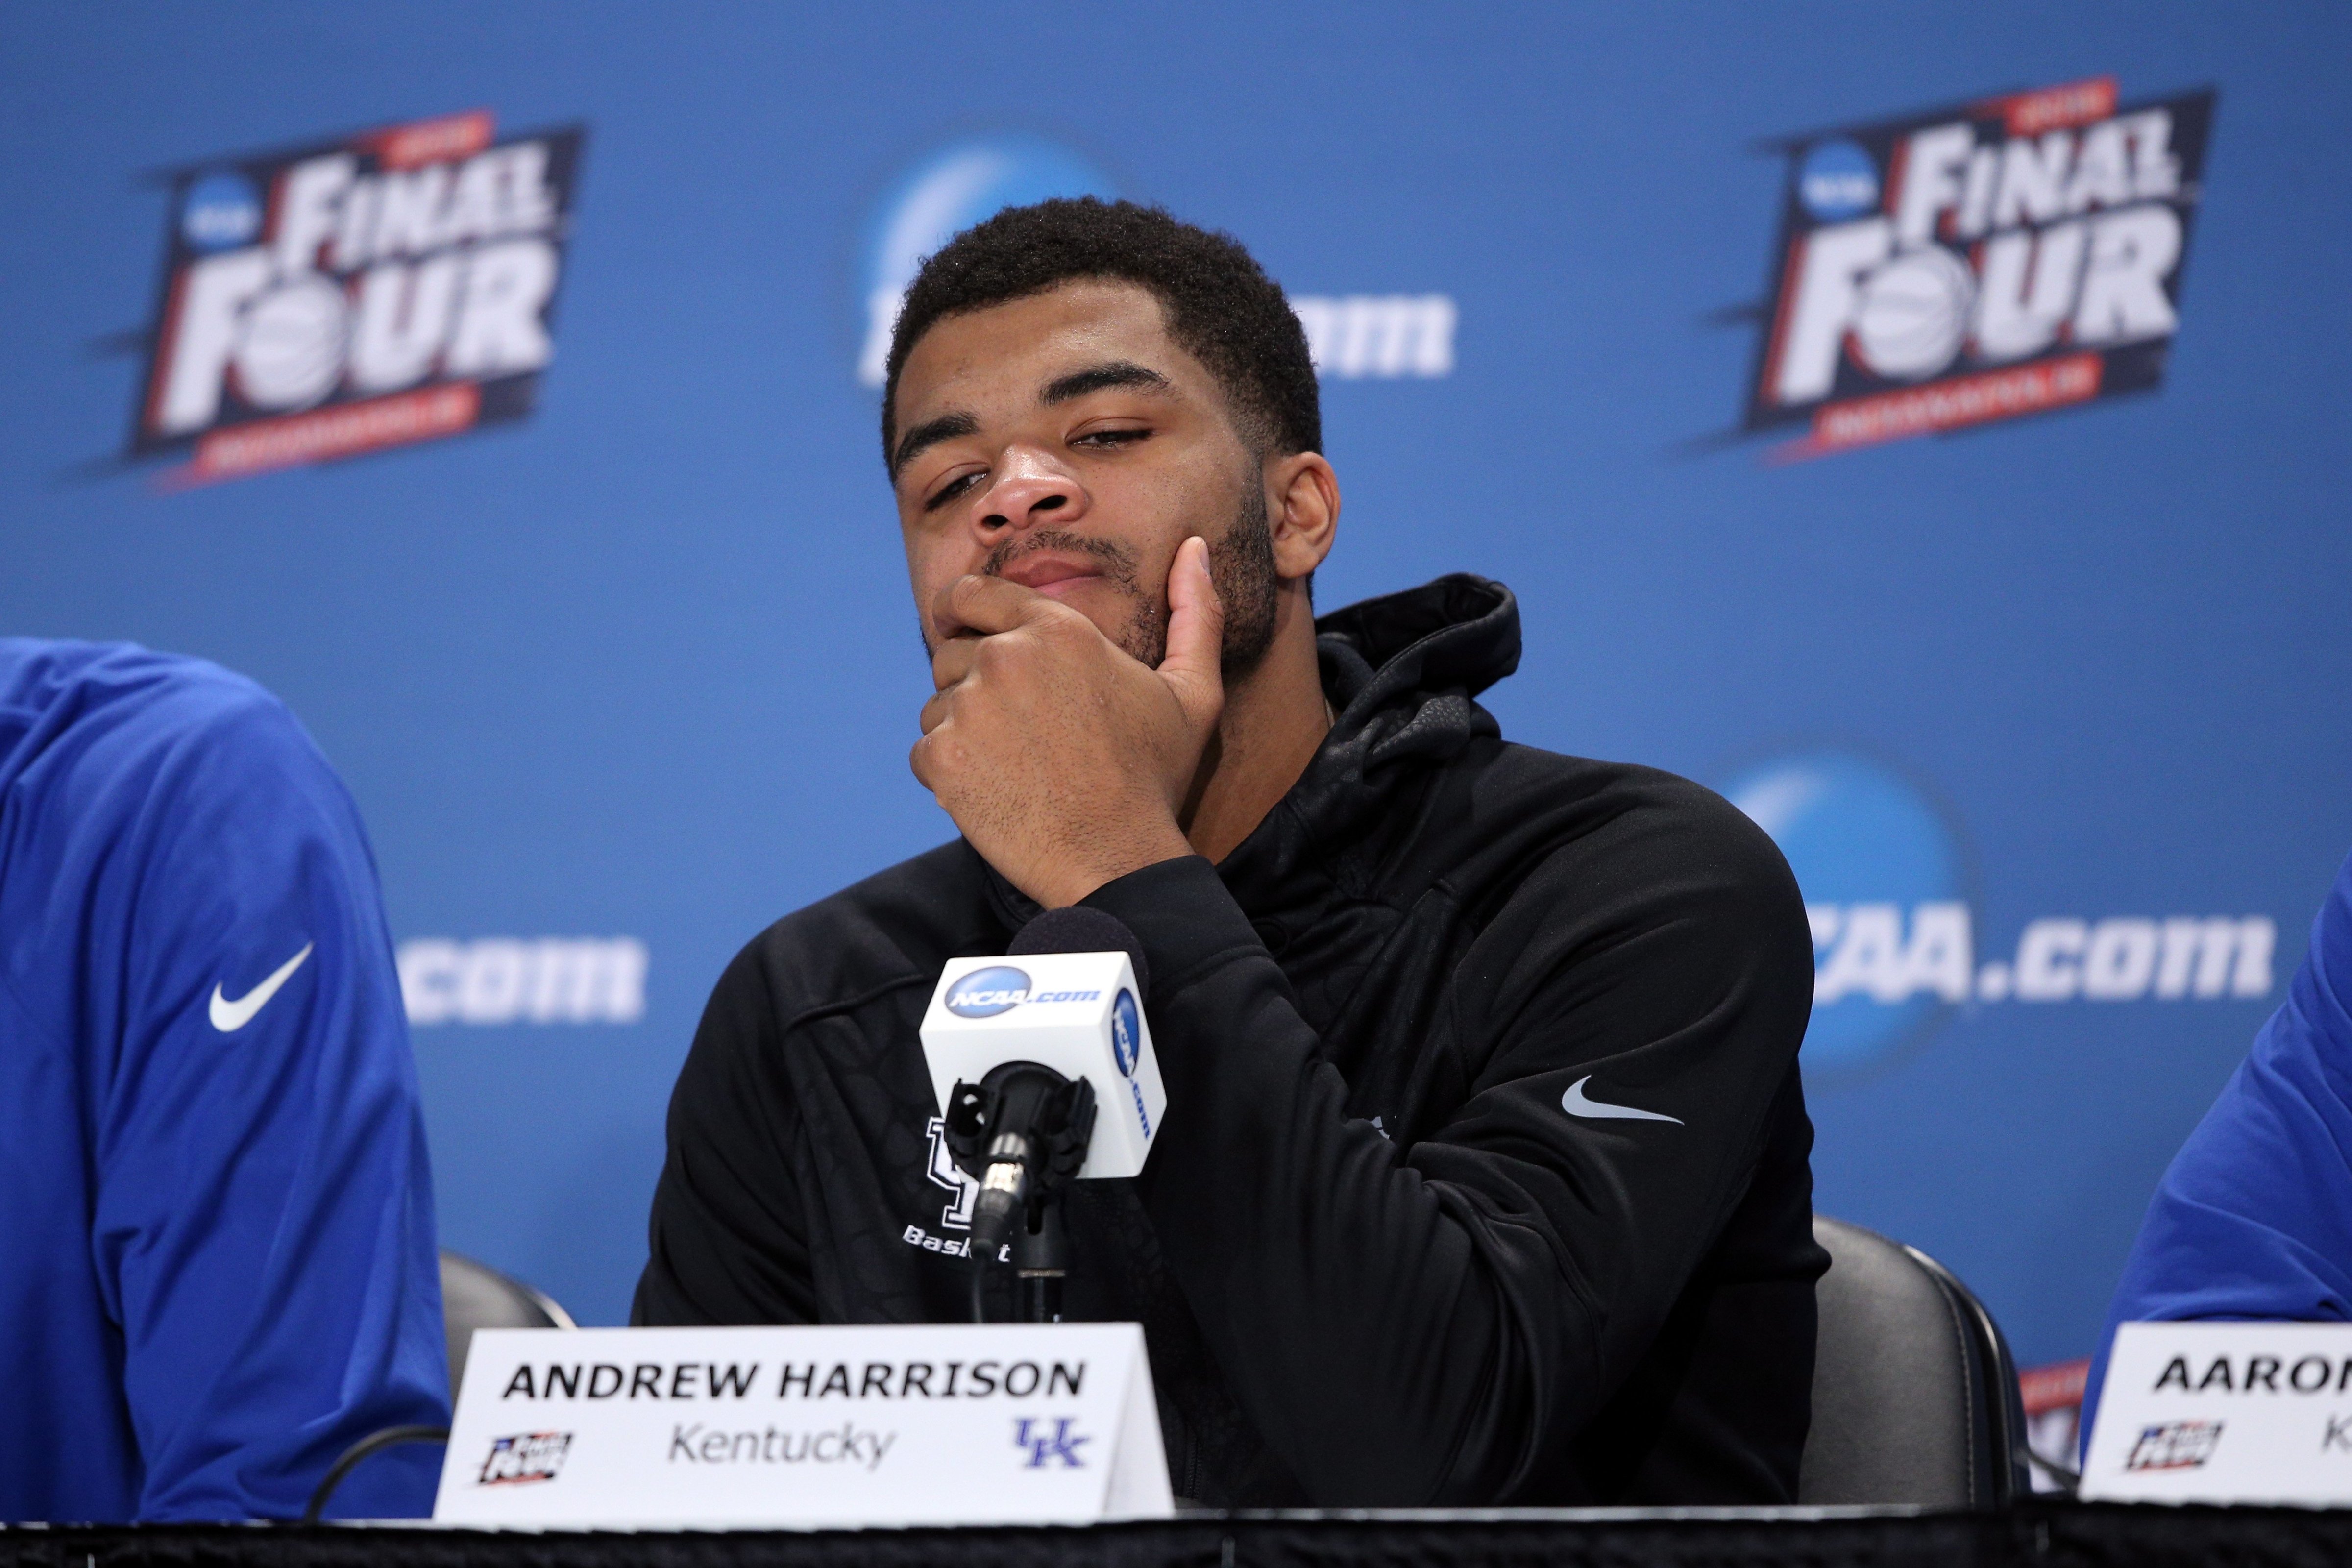 Andrew Harrison of the Kentucky Wildcats reacts in the post game press conference after being defeated by the Wisconsin Badgers during the NCAA Men's Final Four Semifinal at Lucas Oil Stadium on April 4, 2015 in Indianapolis. (Joe Robbins—Getty Images)